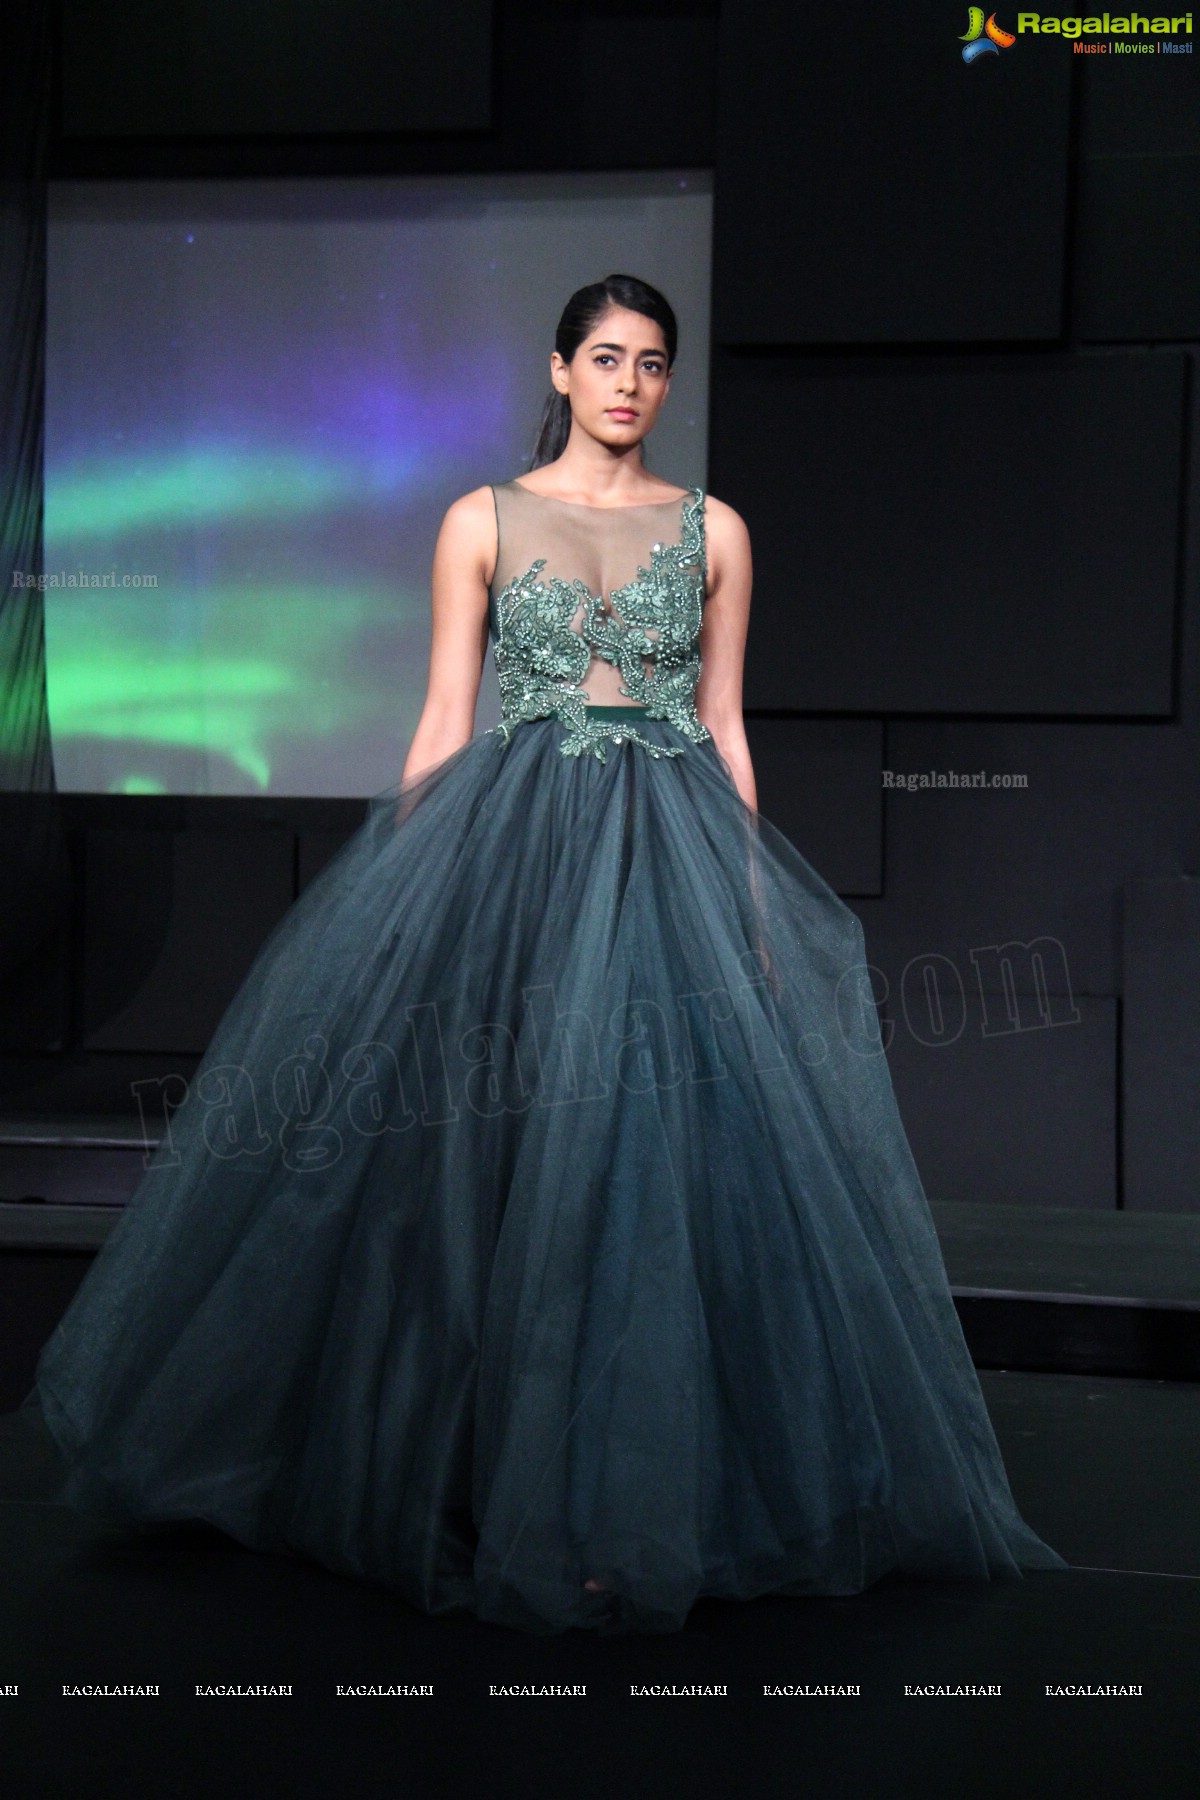 Blenders Pride Fashion Tour 2013, Hyderabad (Day 2)